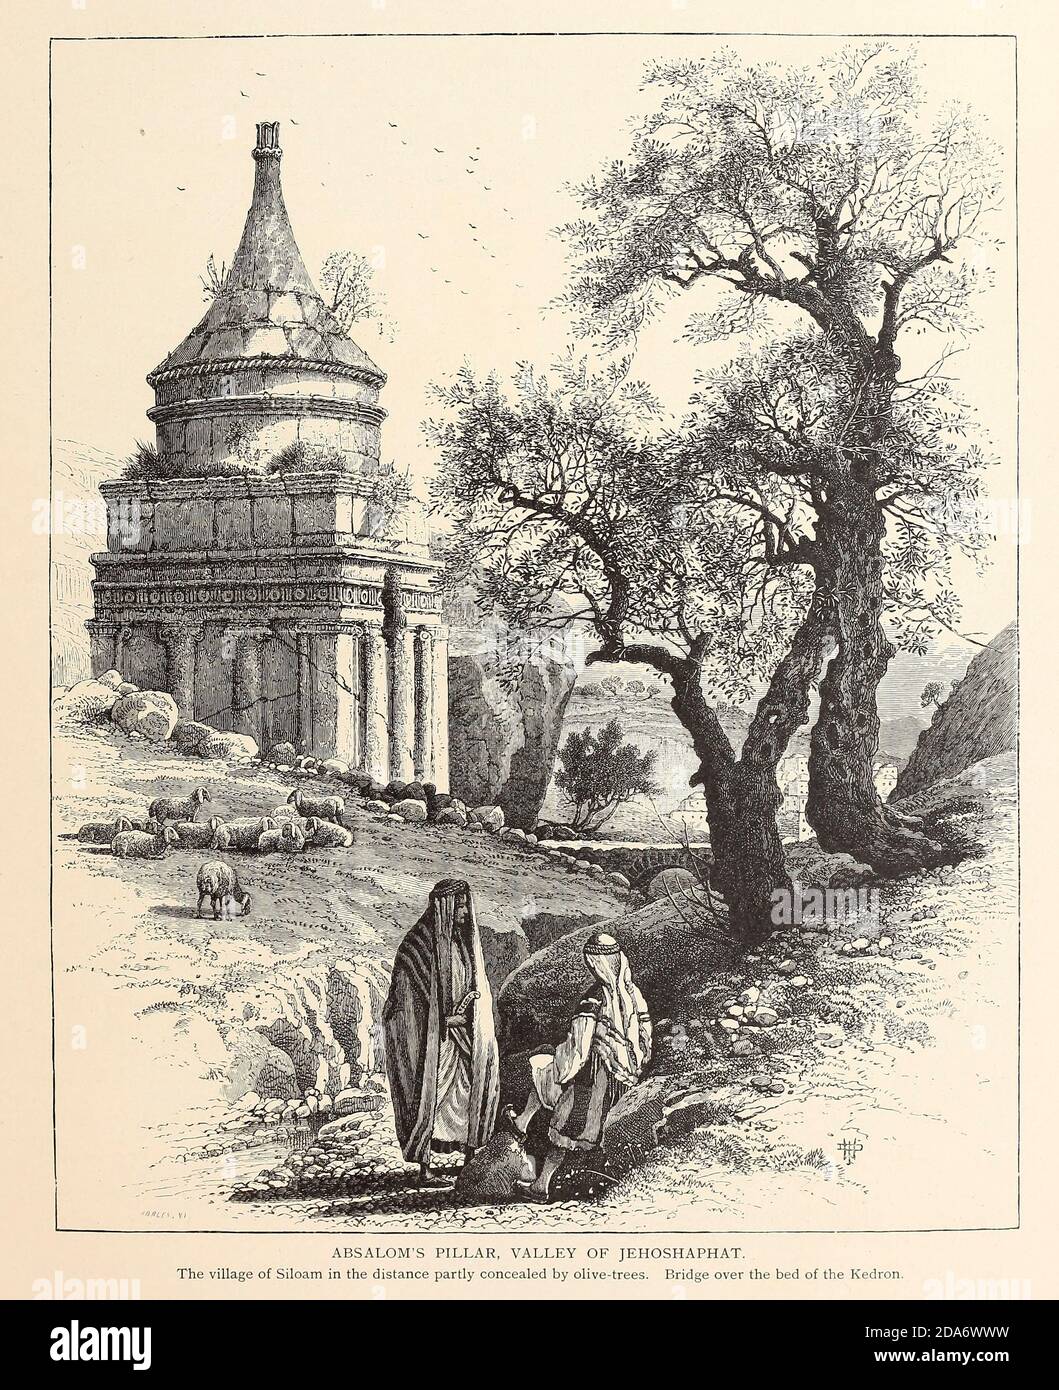 Absalom's Pillar, Valley of Jehoshaphat, Jerusalem from the book Picturesque Palestine, Sinai, and Egypt By  Colonel Wilson, Charles William, Sir, 1836-1905. Published in New York by D. Appleton and Company in 1881  with engravings in steel and wood from original Drawings by Harry Fenn and J. D. Woodward Volume 1 Stock Photo